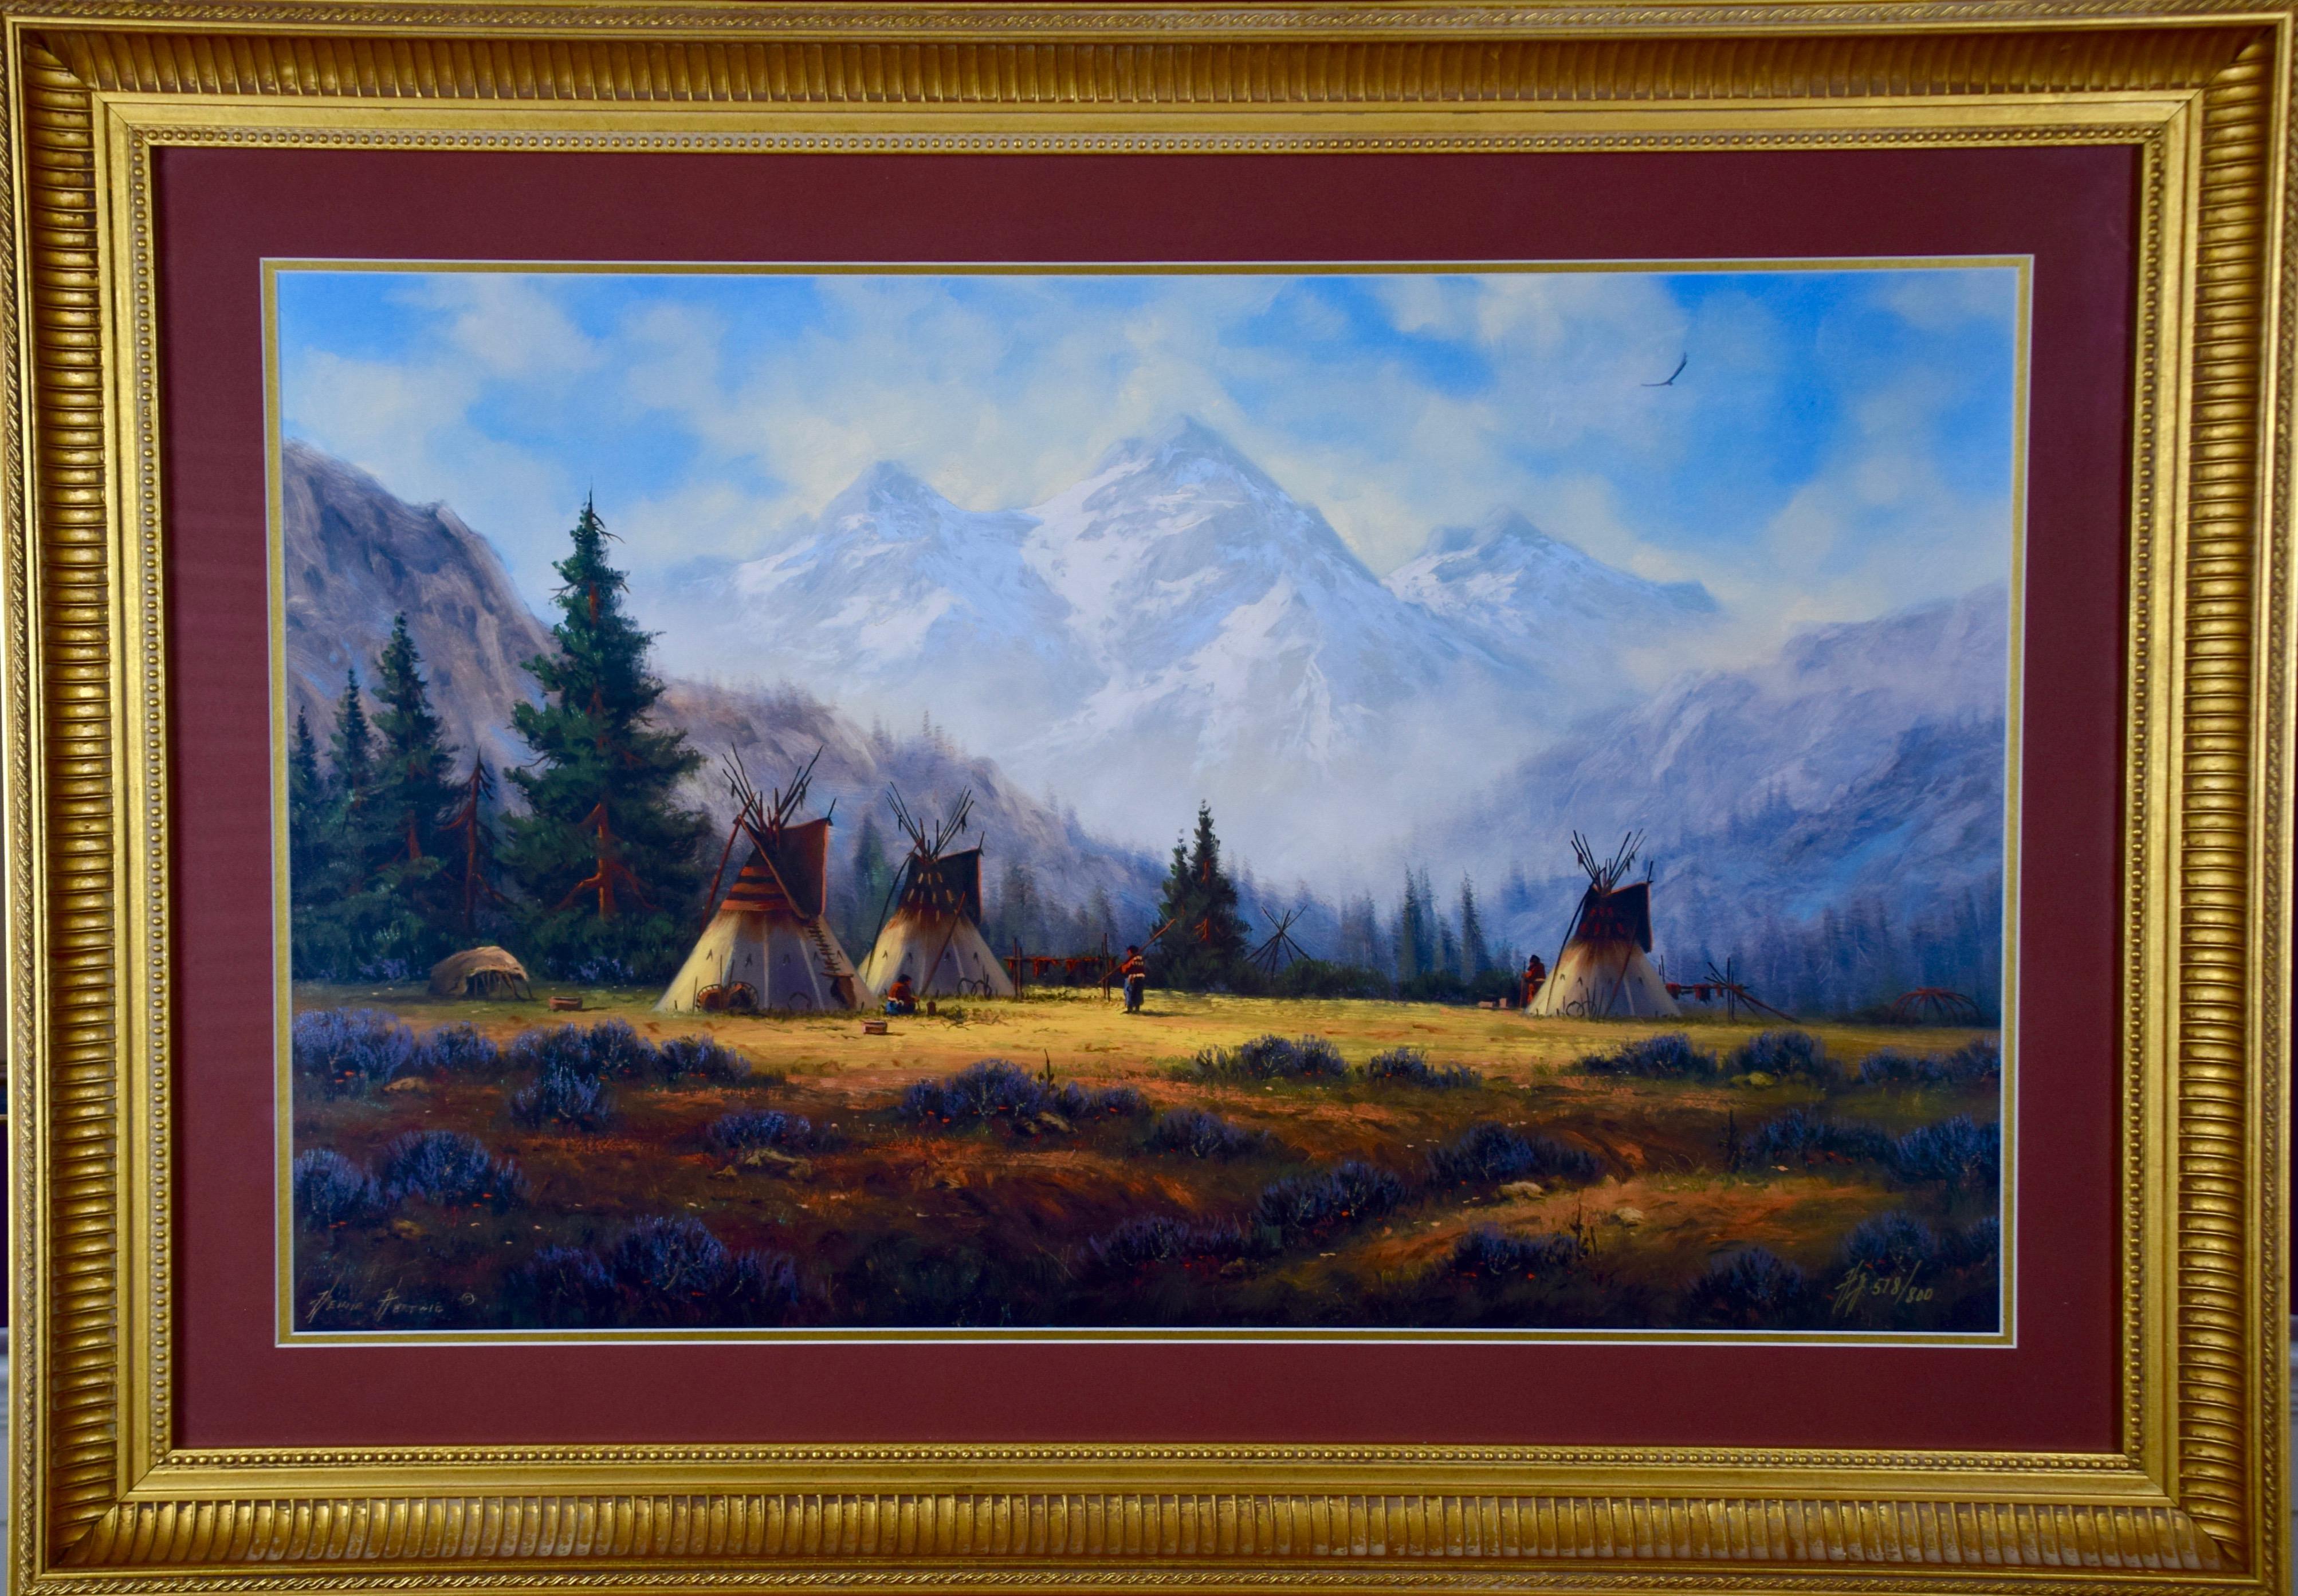 Native American Encampment in a Valley, Limited Edition Hartwig Signed Print